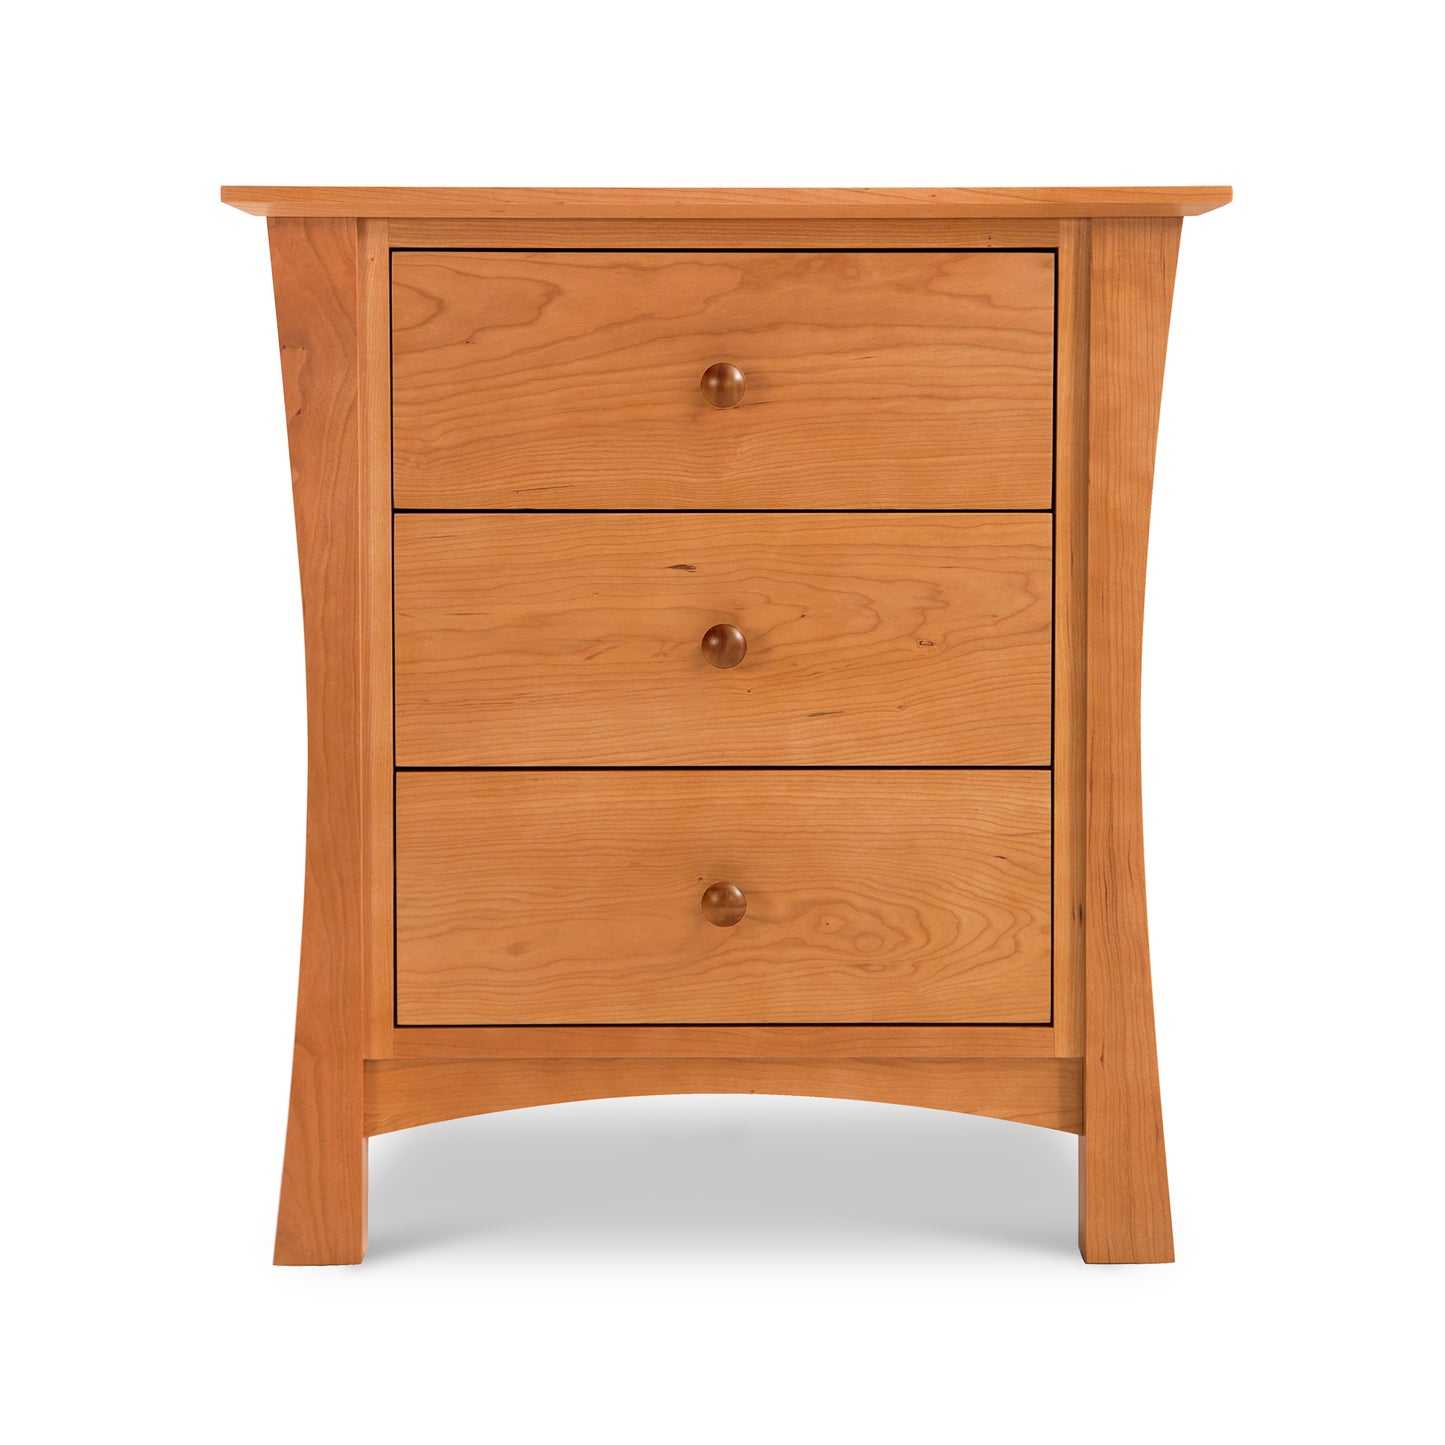 The Andrews 3-Drawer Nightstand by Lyndon Furniture is a stylish addition to any high-end bedroom collection, offering ample storage with three drawers.